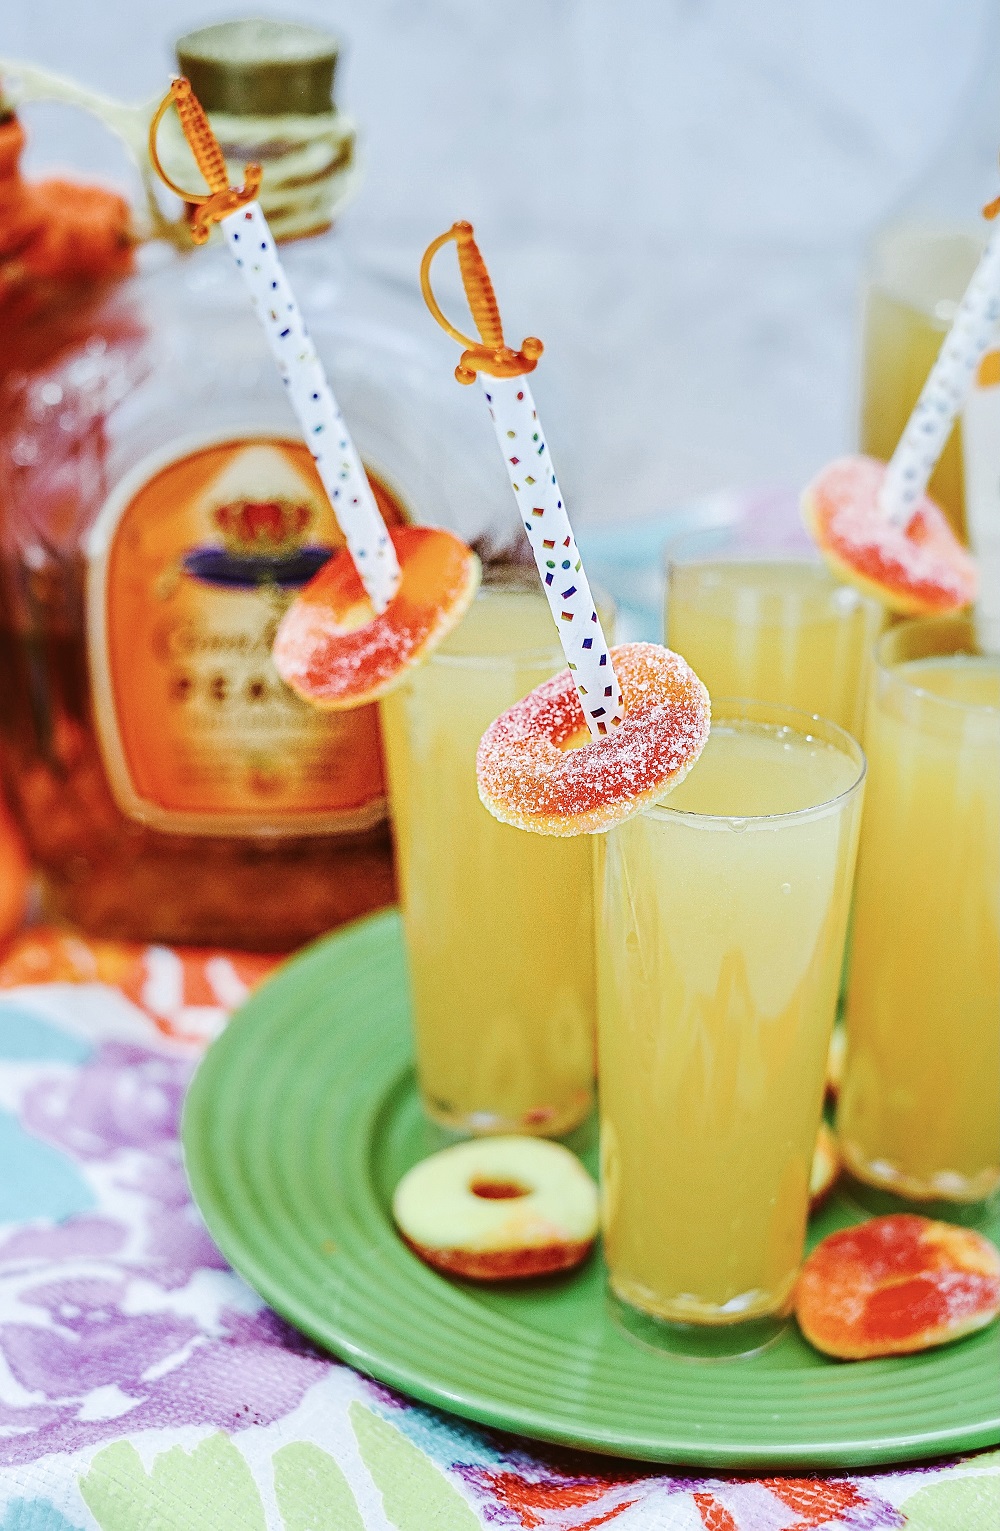 Crown Royal Peach Shooters with a peach ring for garnish.